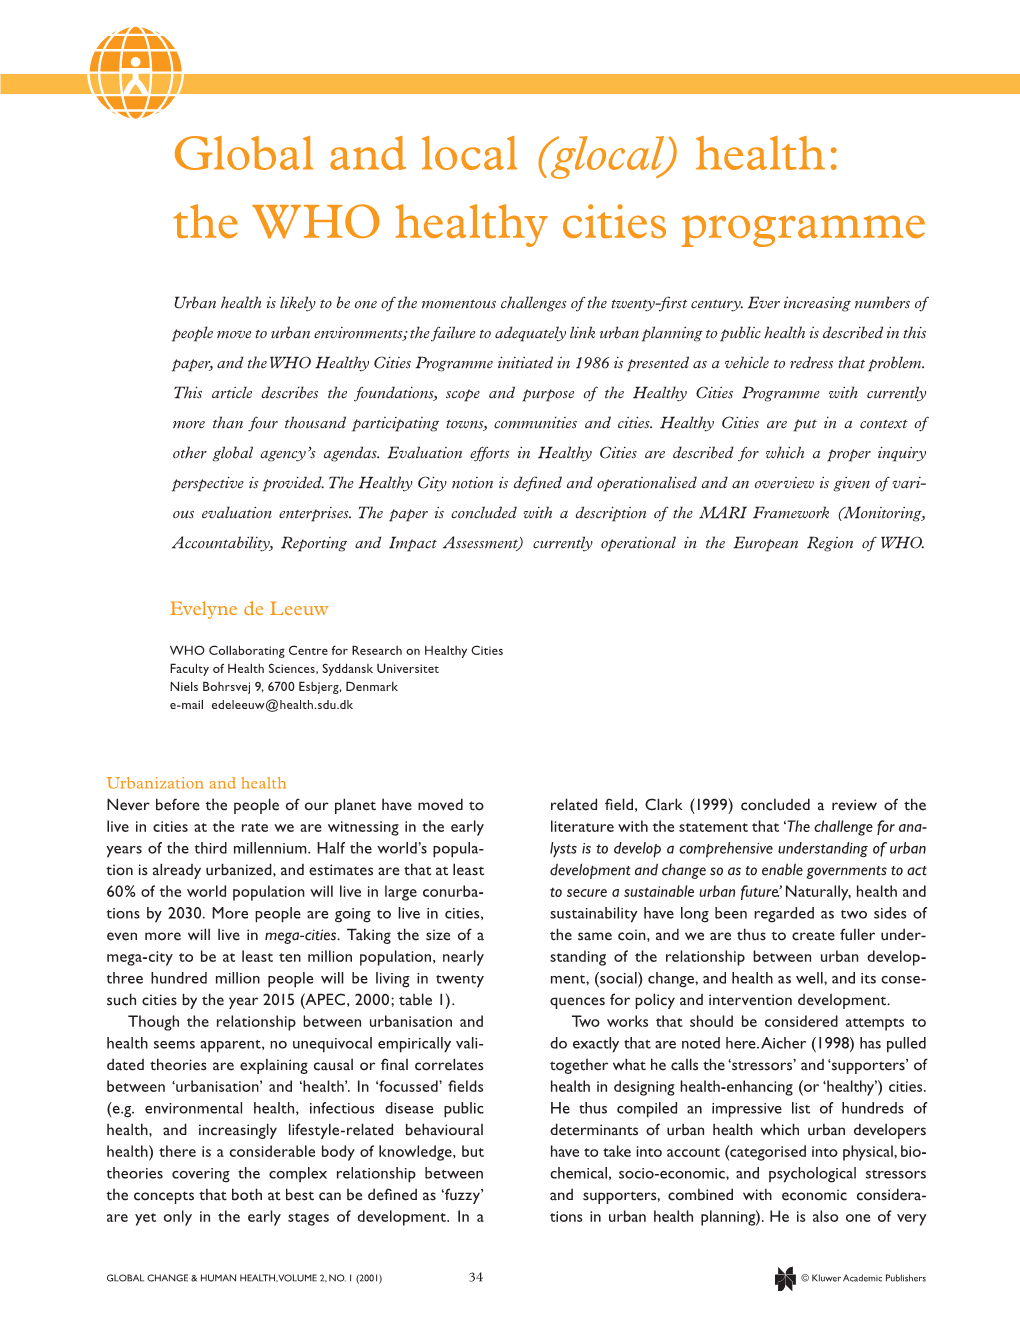 Global and Local (Glocal) Health: the WHO Healthy Cities Programme